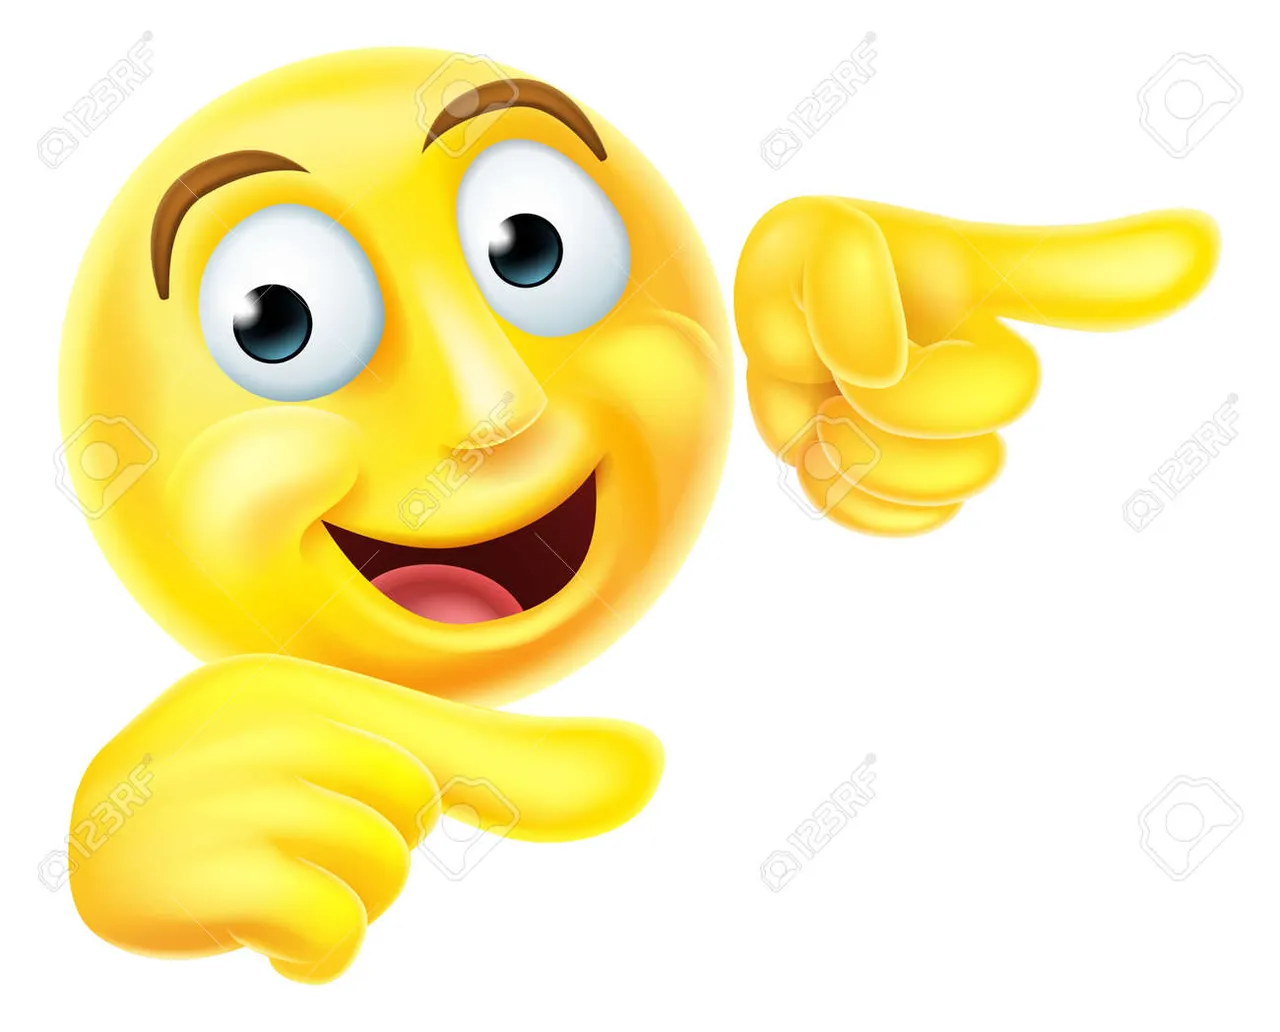 45052405-a-happy-emoji-emoticon-smiley-face-character-pointing-with-both-hands.jpg